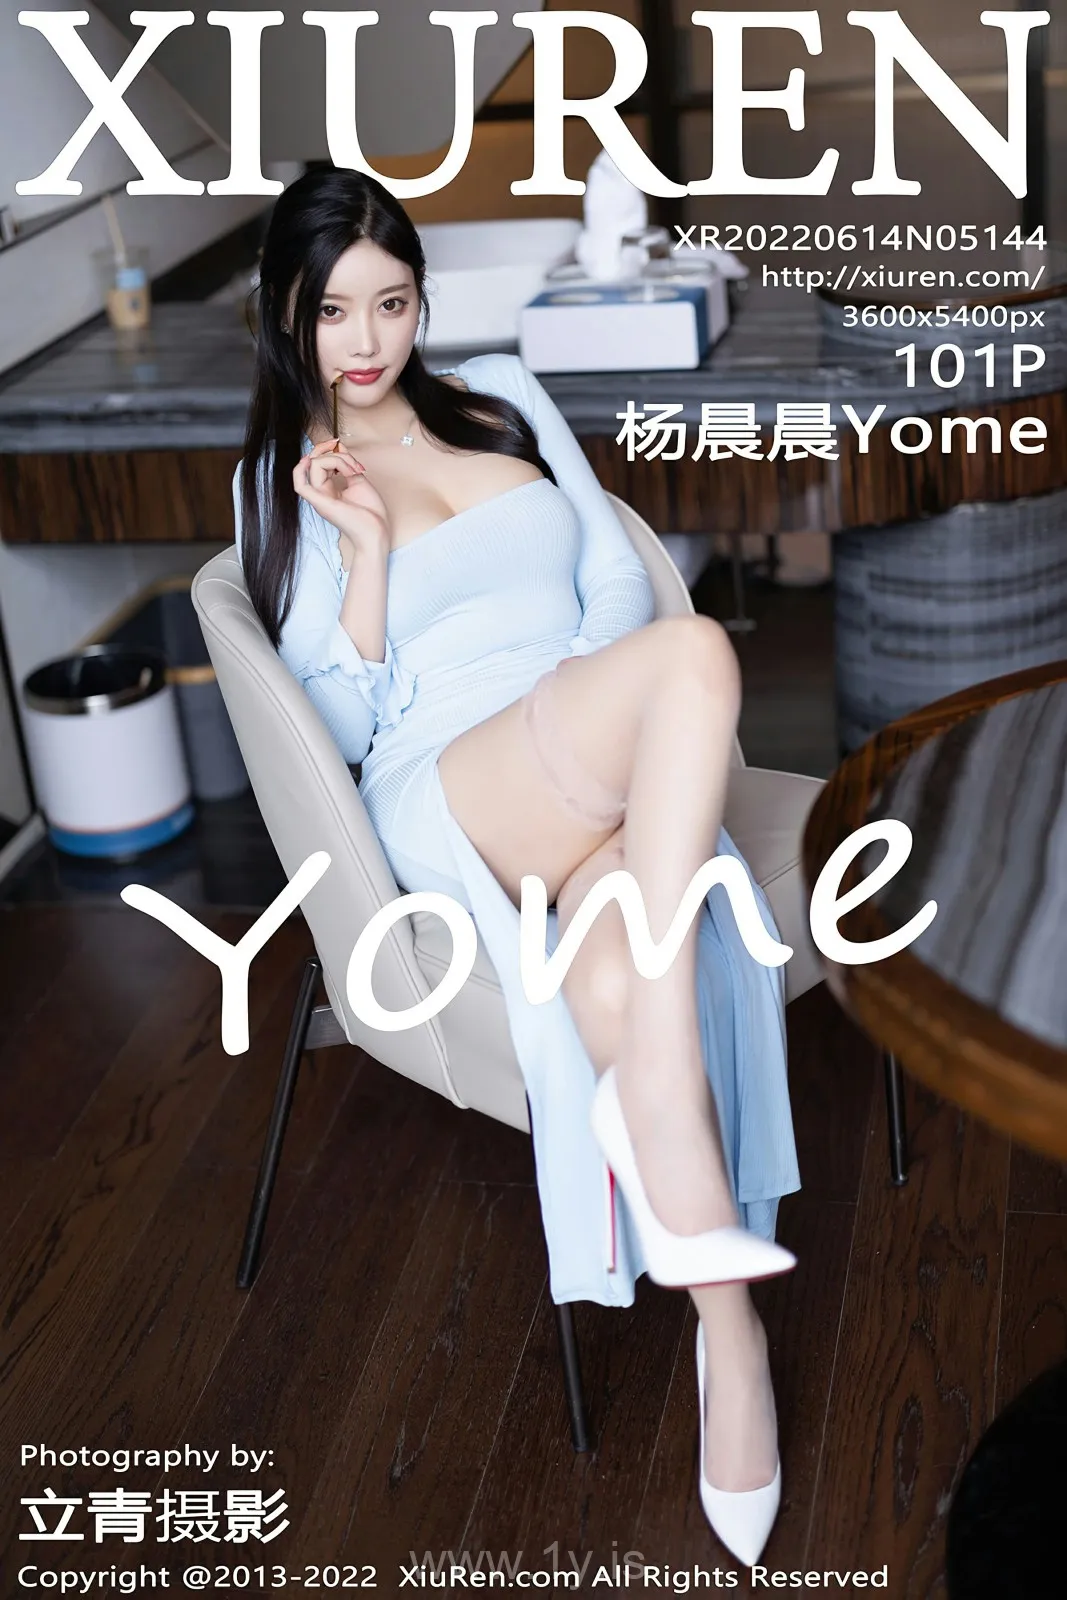 XIUREN(秀人网) NO.5144 Knockout Chinese Homebody Girl 杨晨晨Yome